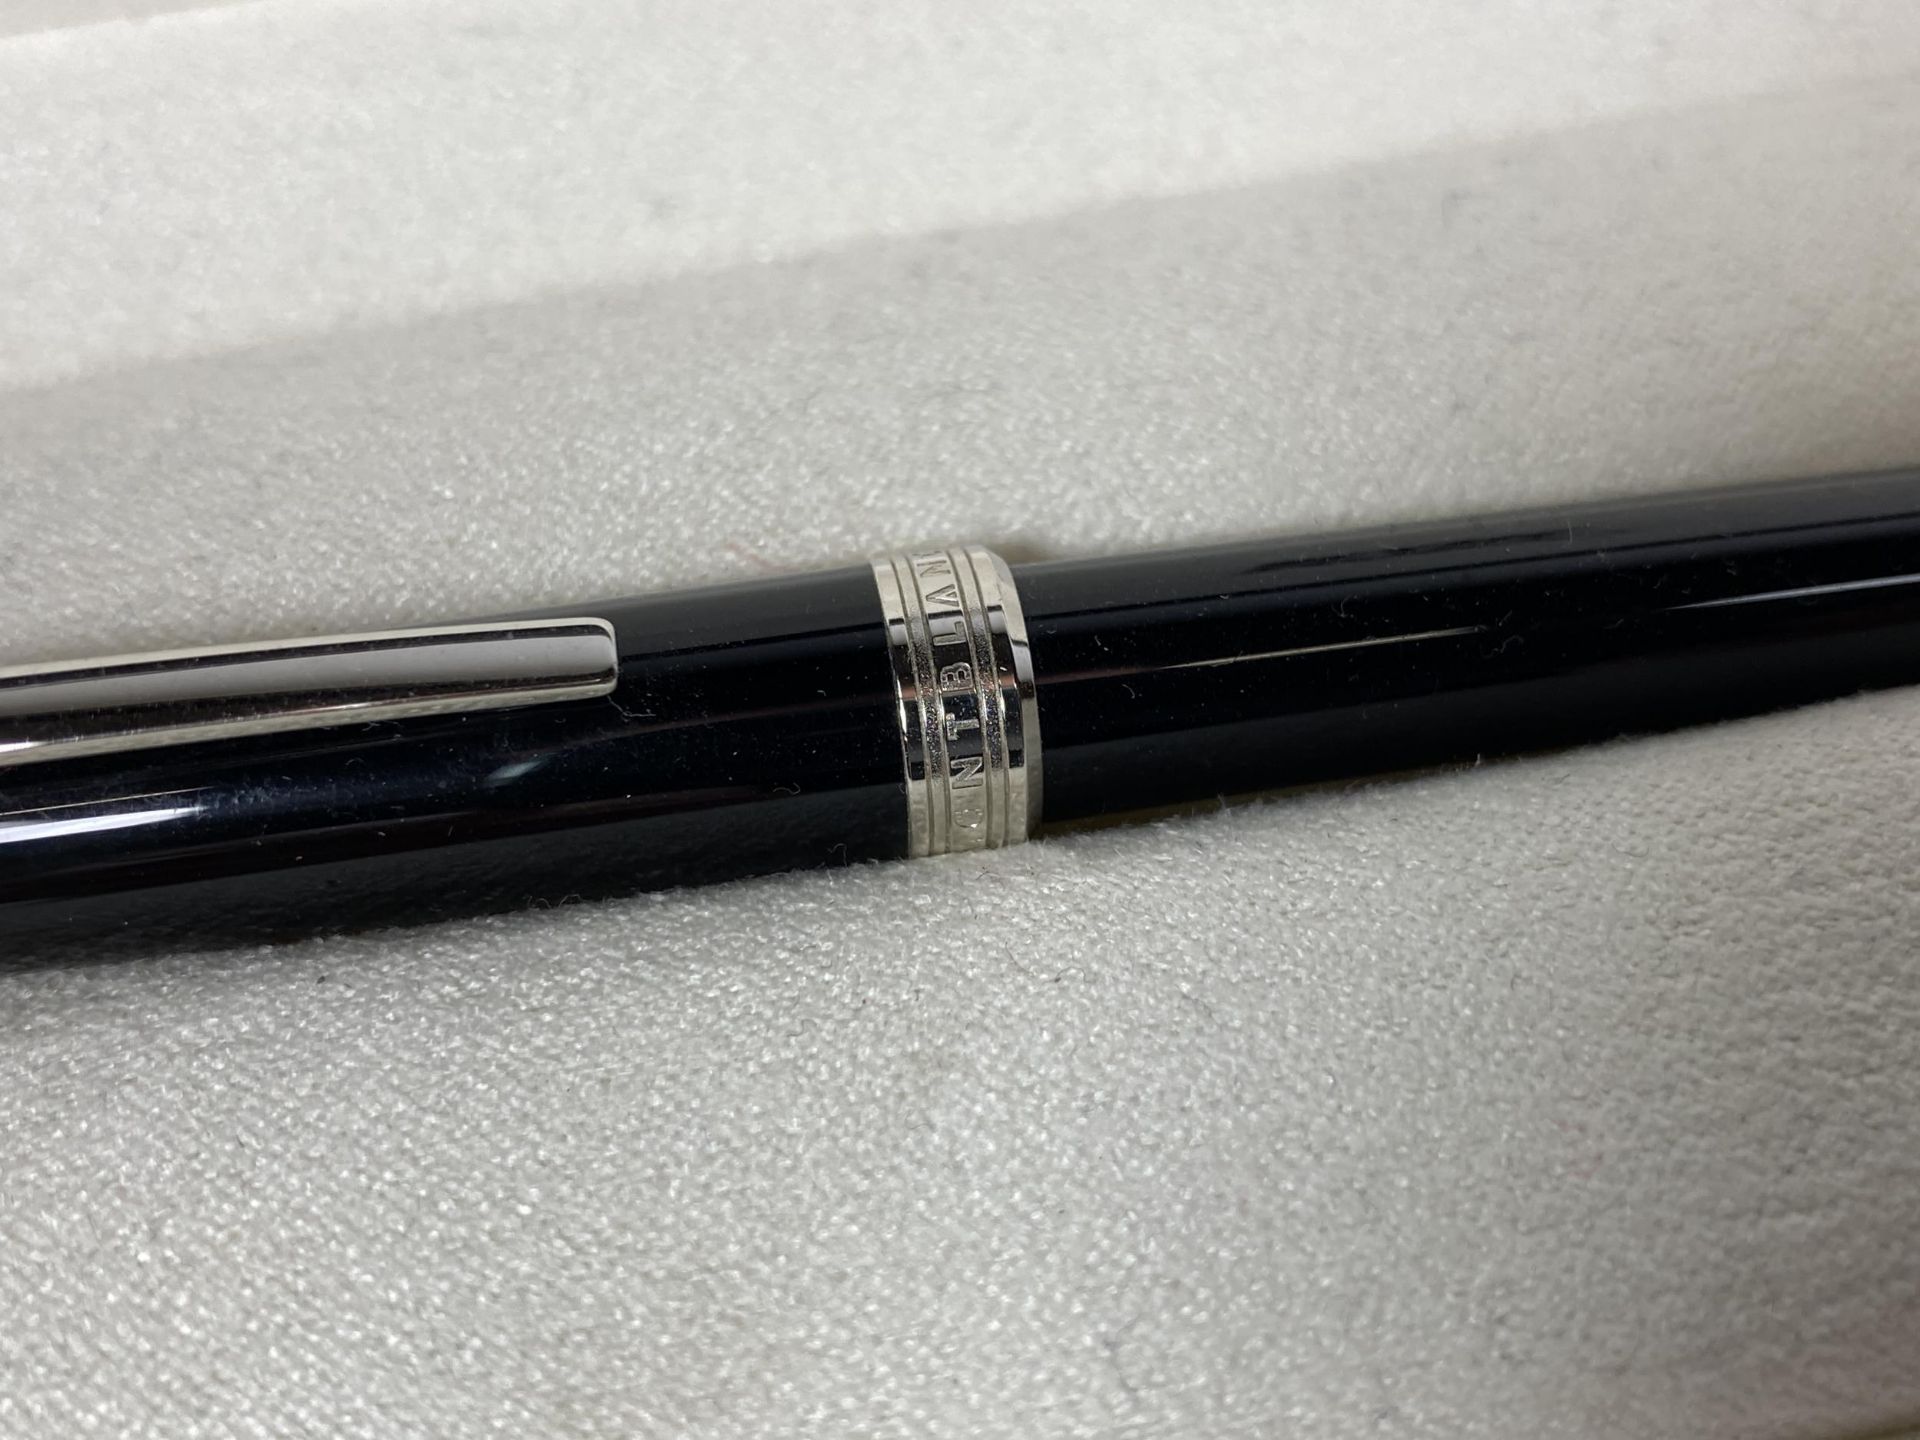 A BOXED MONT BLANC BALL POINT PEN - Image 2 of 3